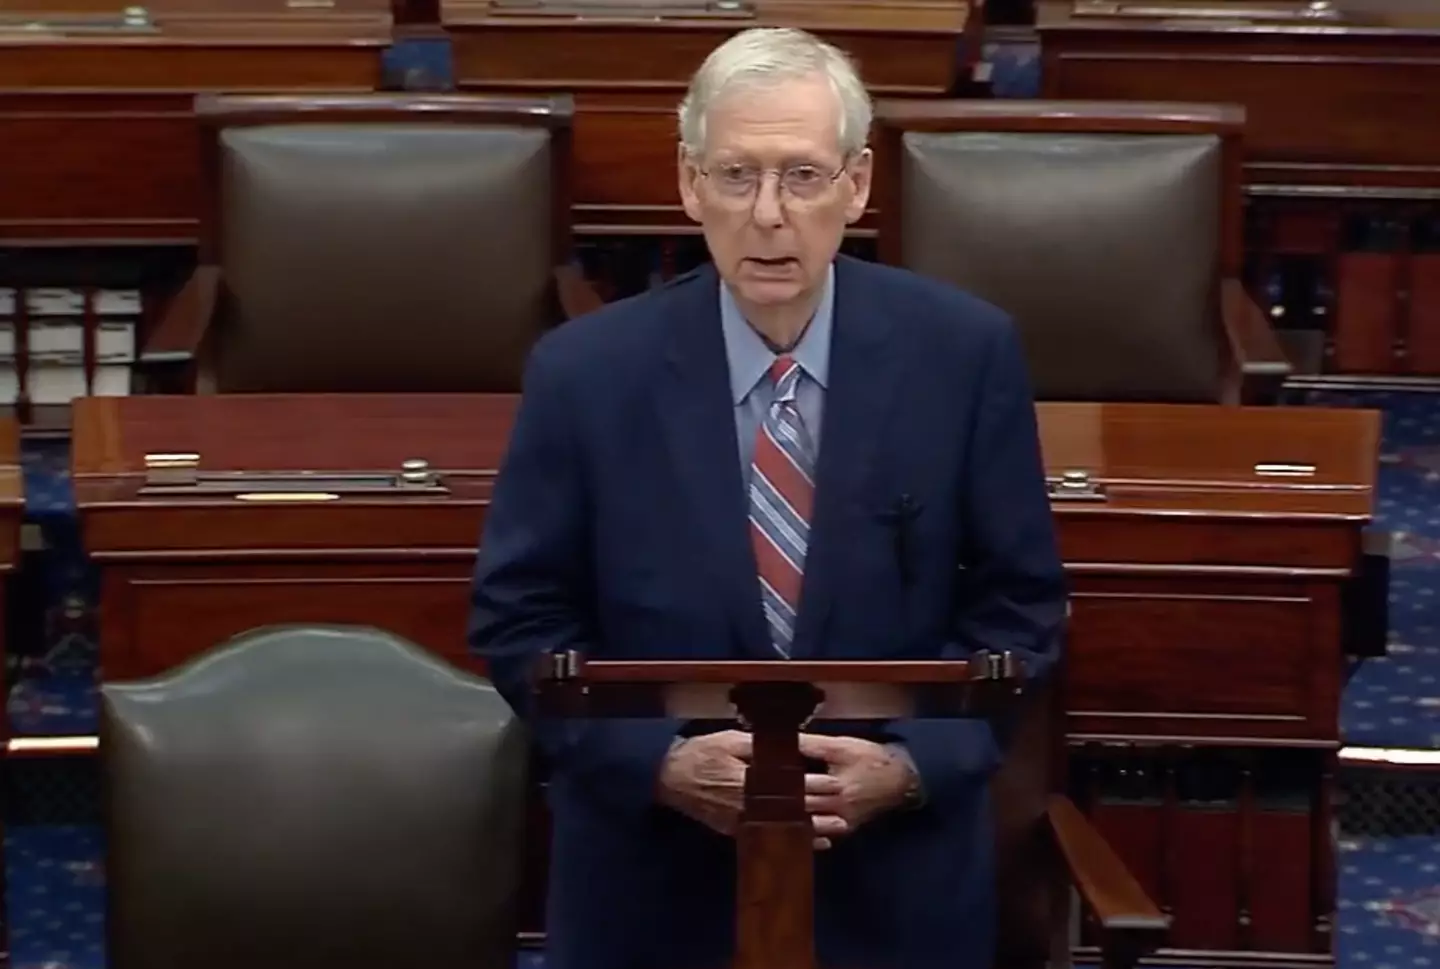 Mitch McConnell made a brief reference to the moment he froze up during a press conference.